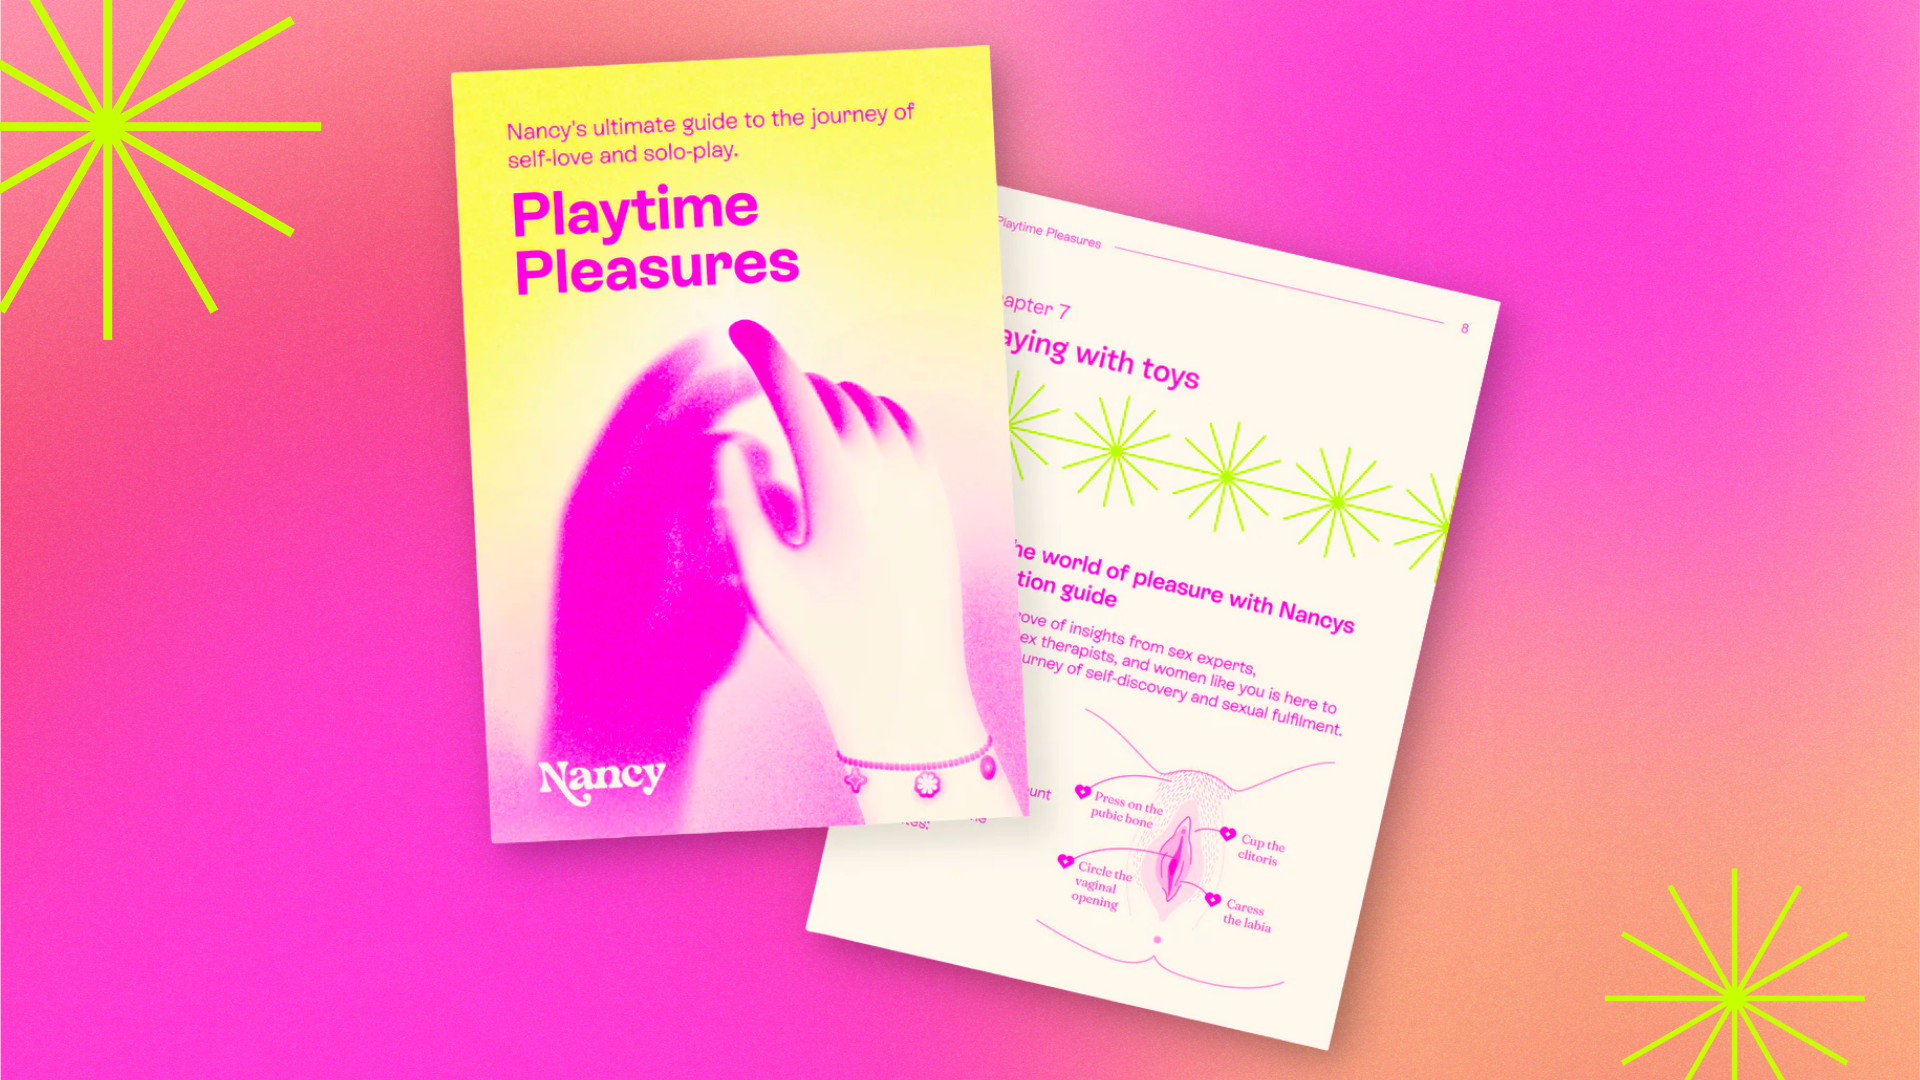 Spark Up Your Pleasure with Nancy's Playtime Pleasures Guide